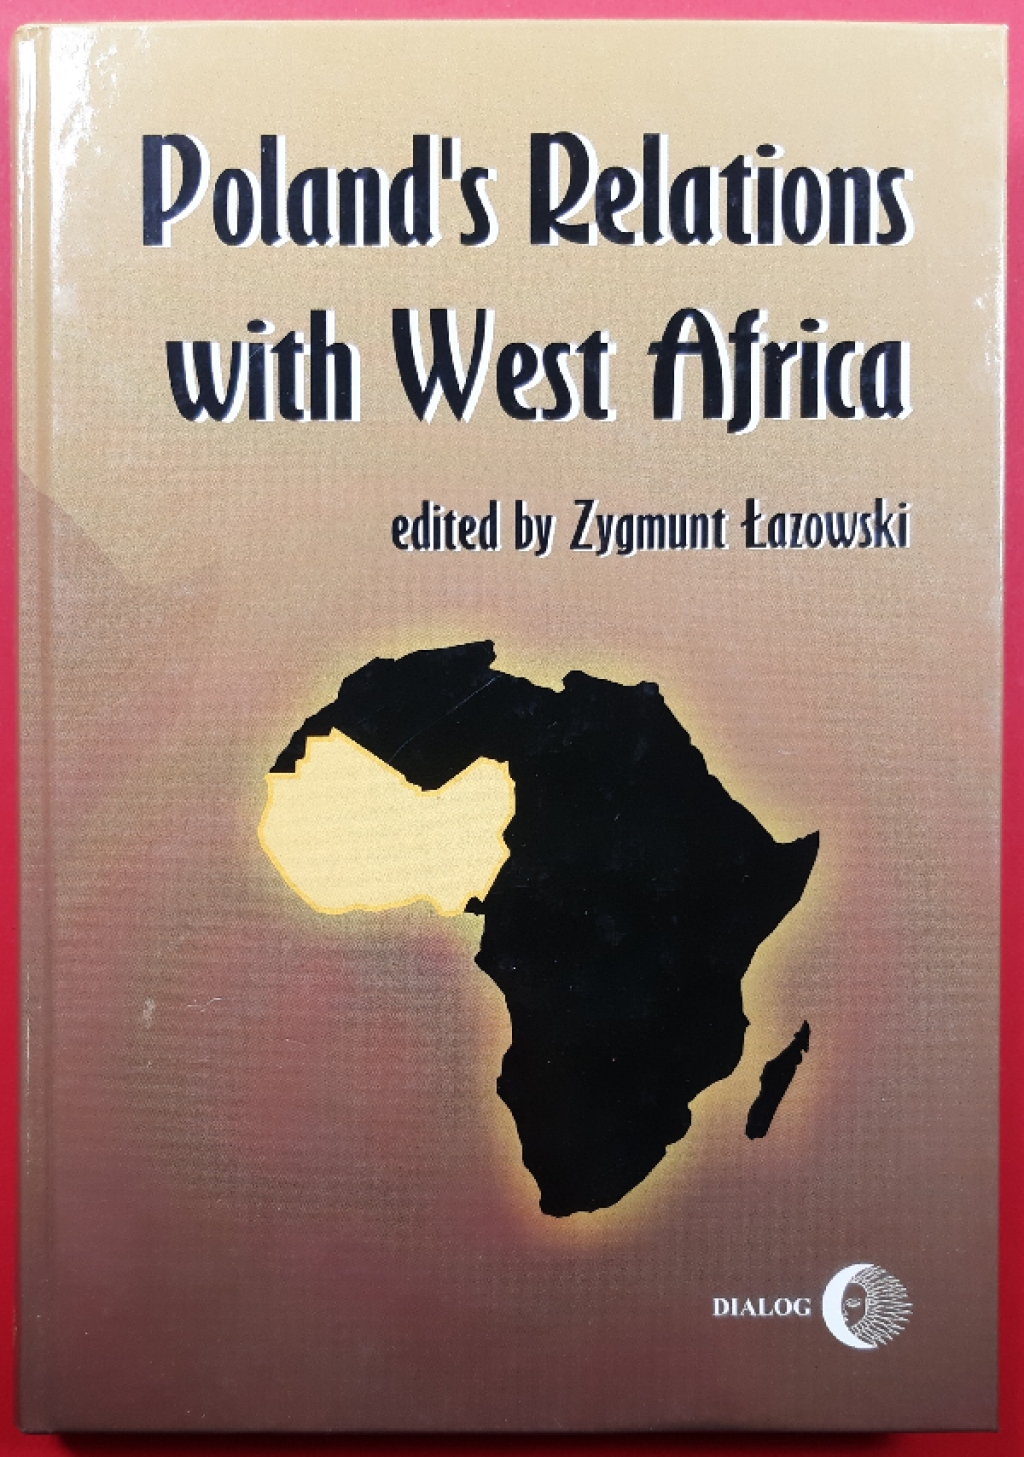 Poland's Relations with West Africa